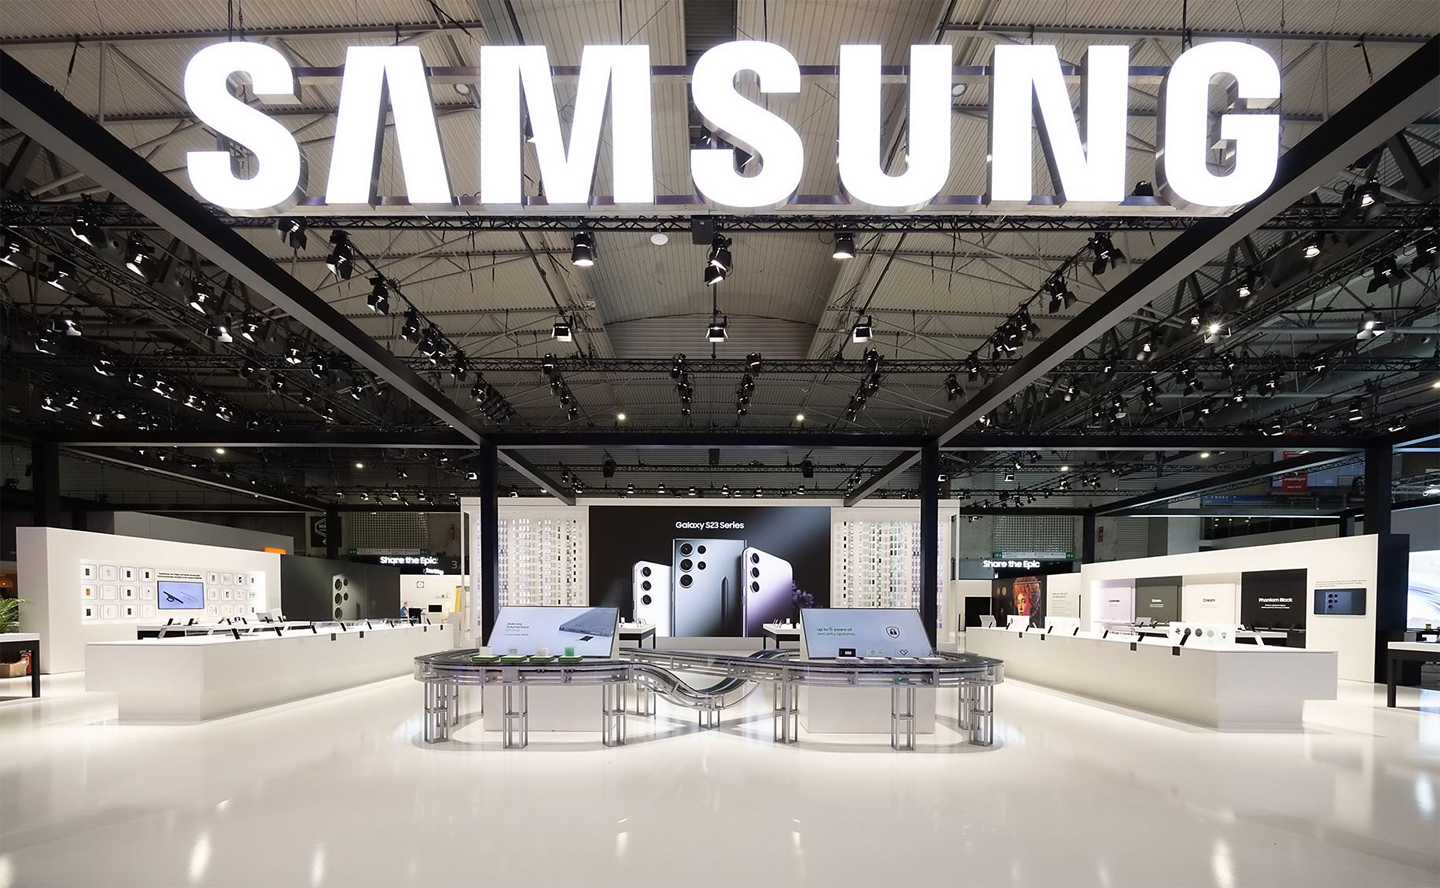 Samsung Showcases Connected Home Appliances Designed for